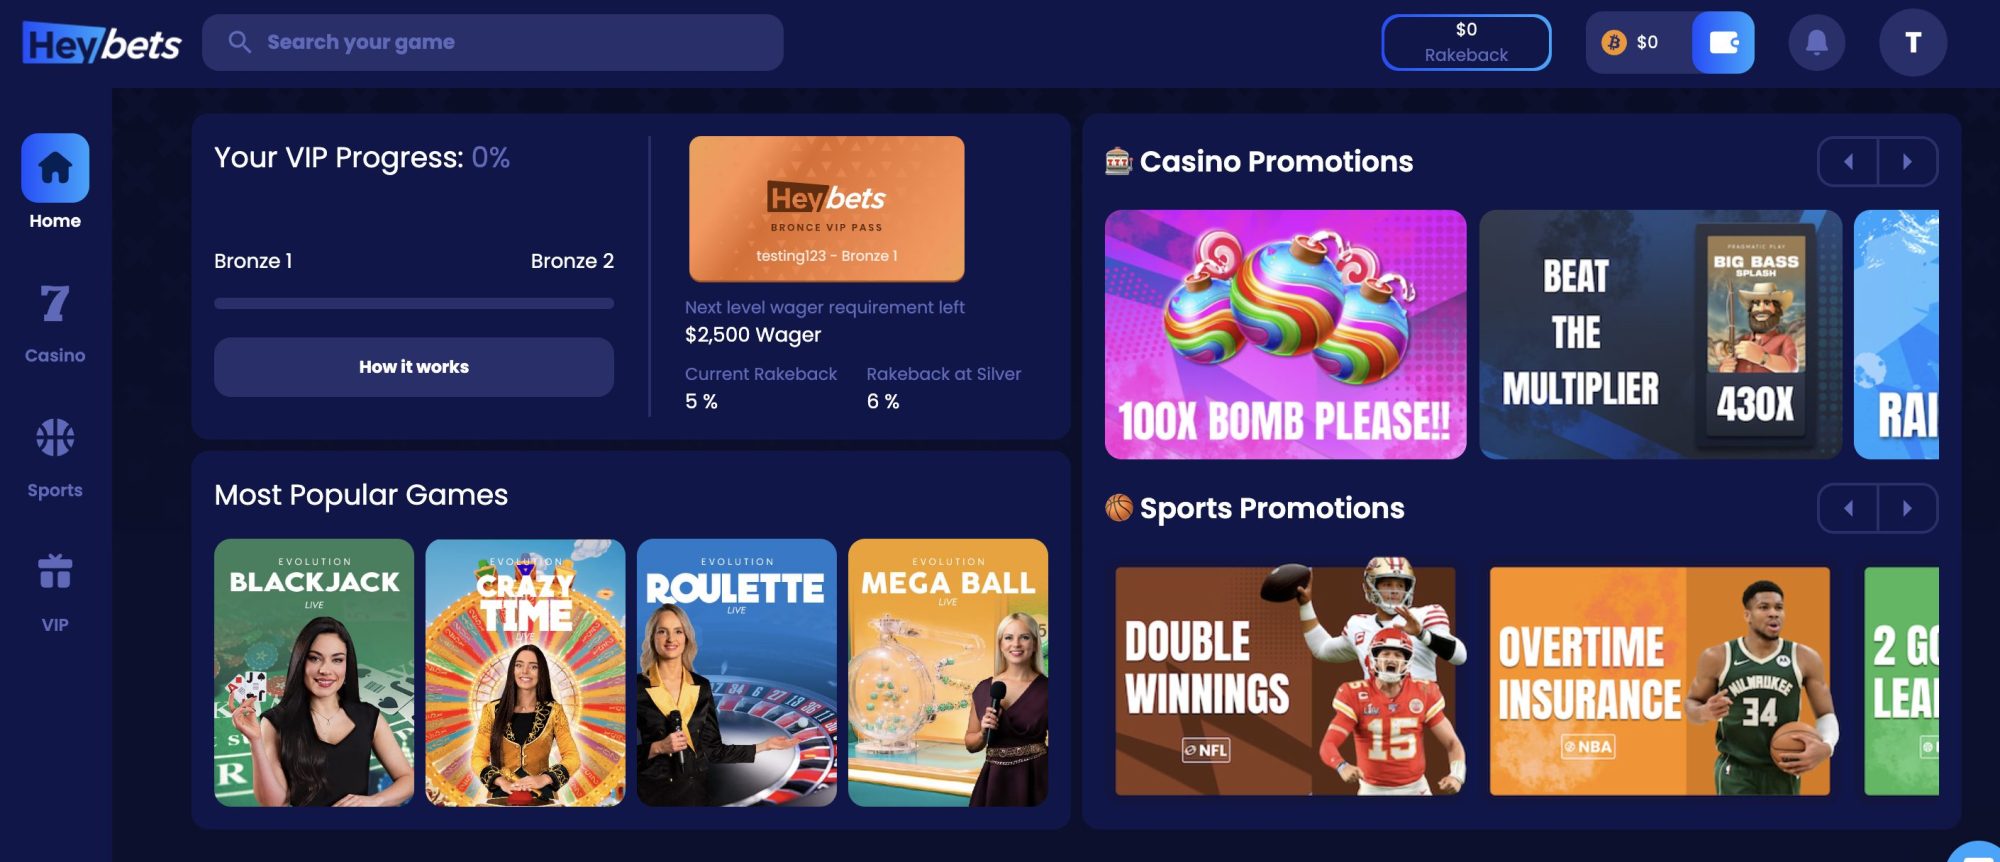 Heybets casino review 